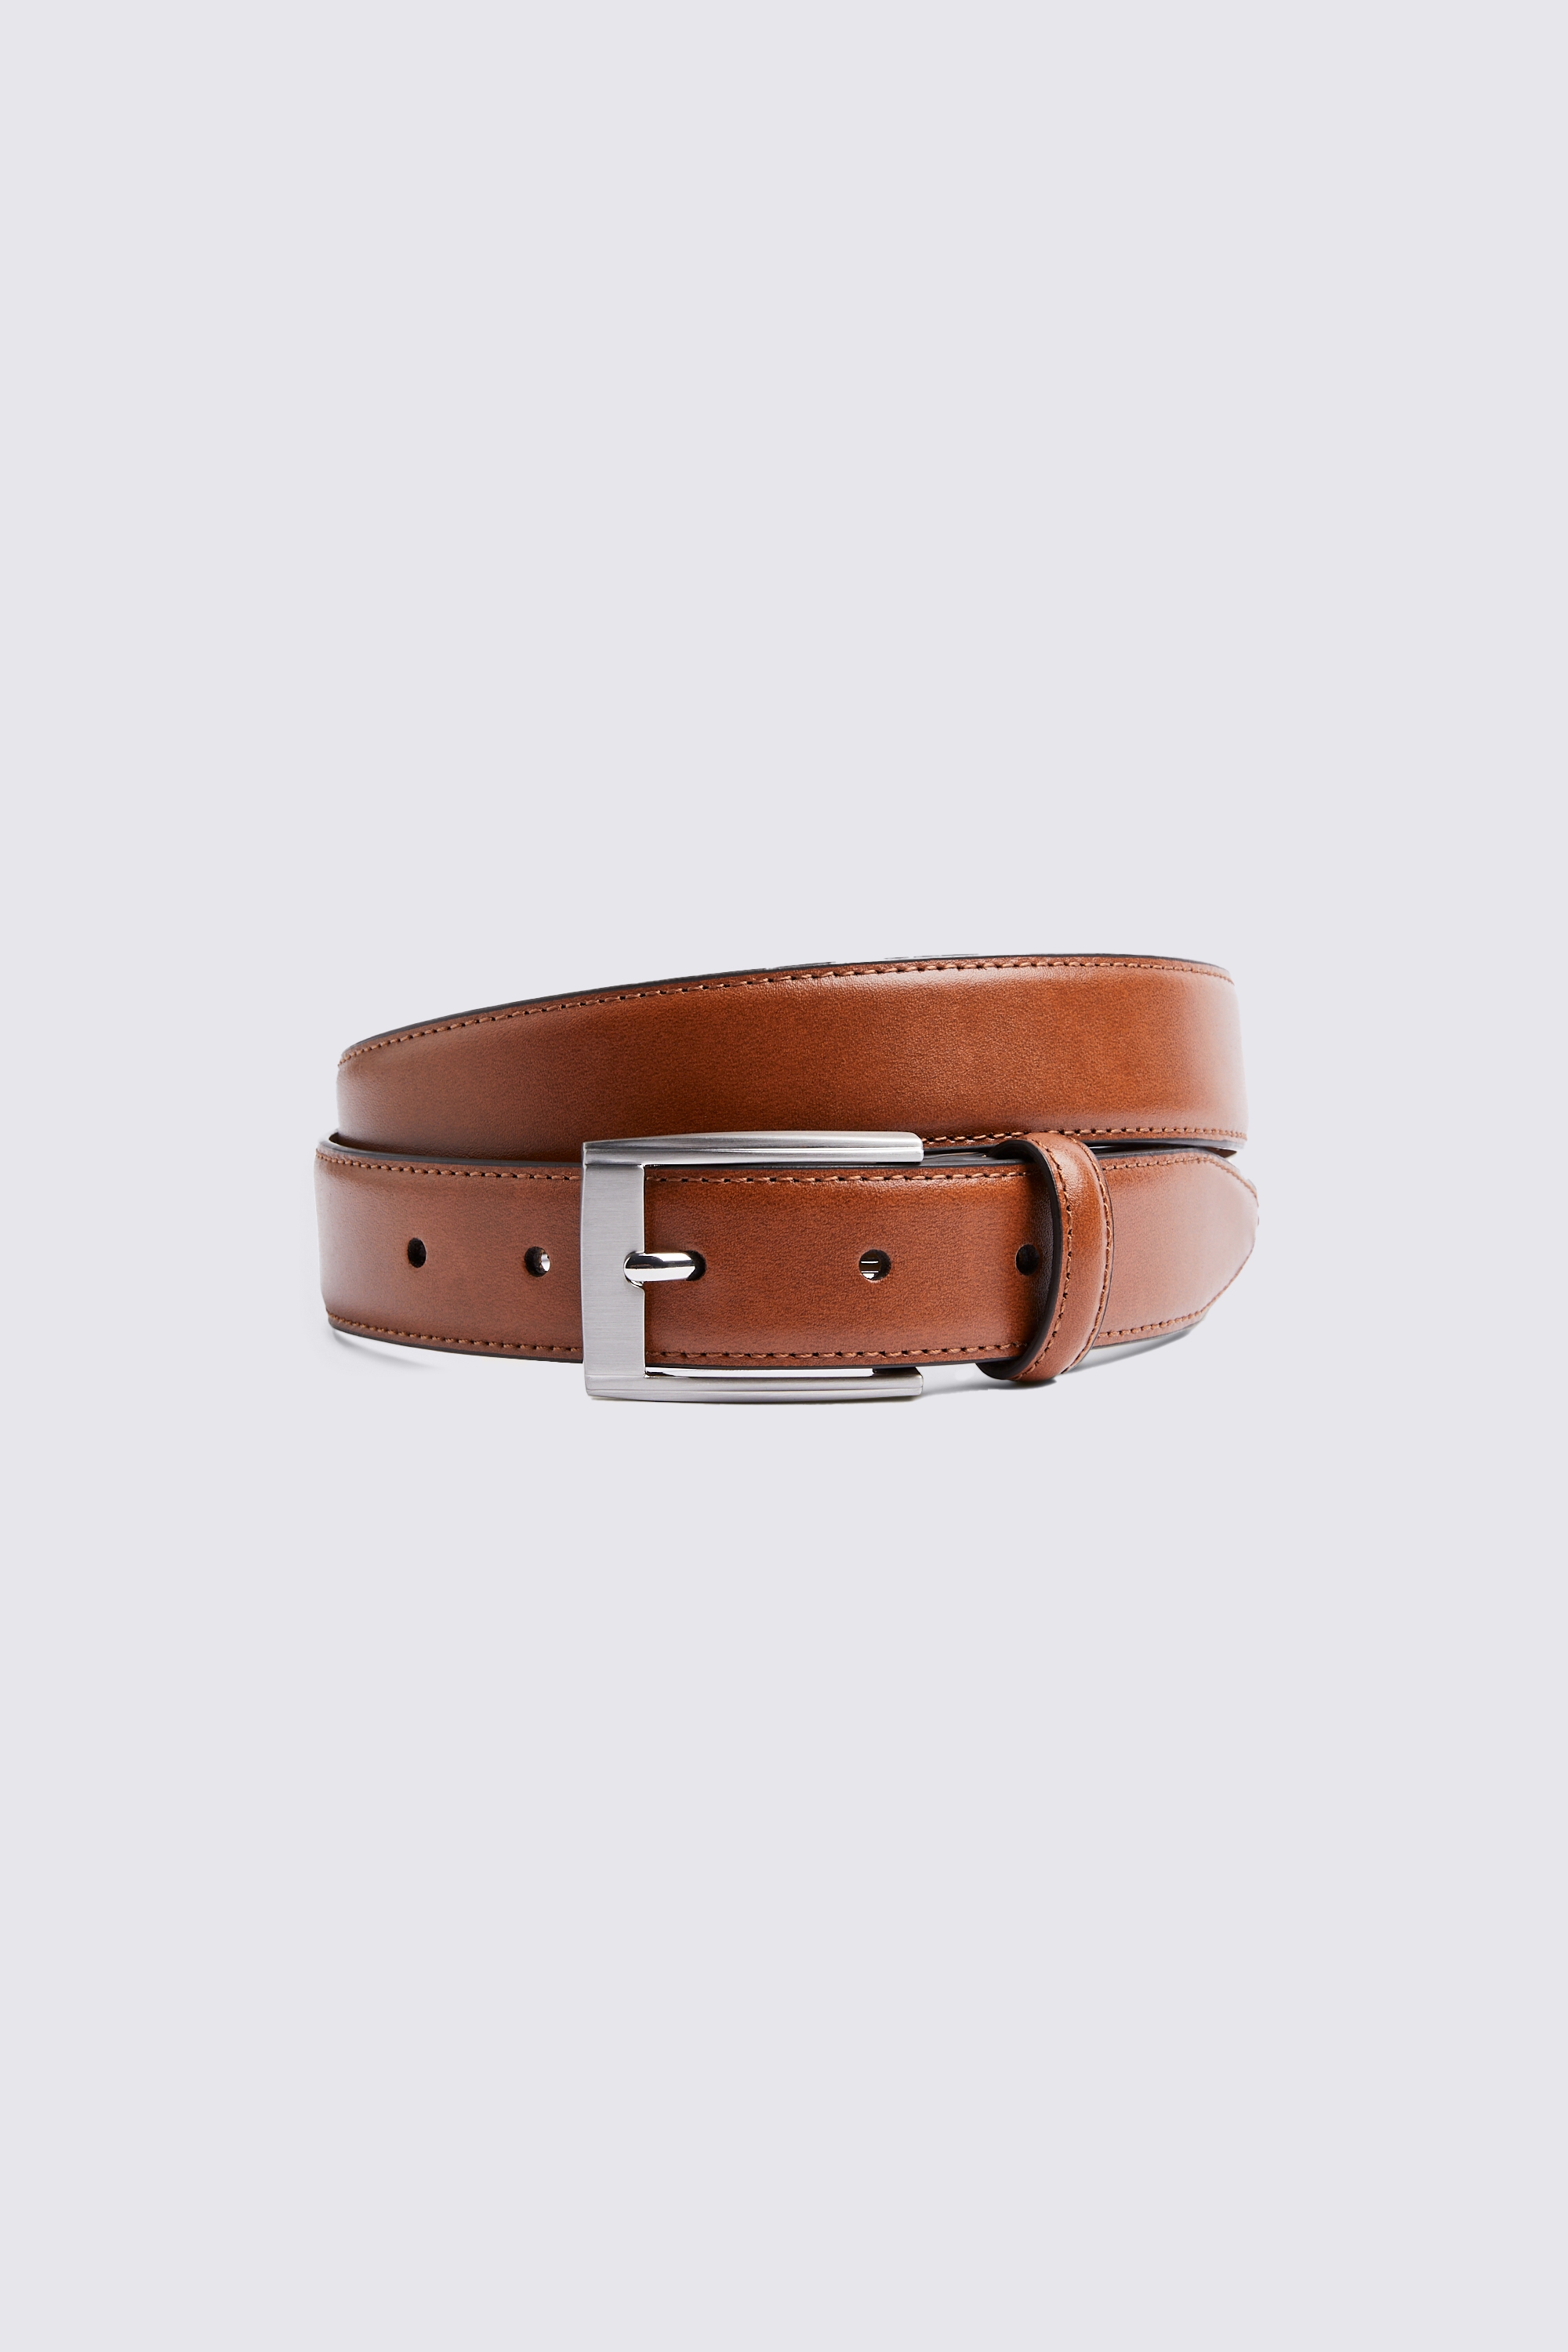 Tan Leather Belt | Buy Online at Moss